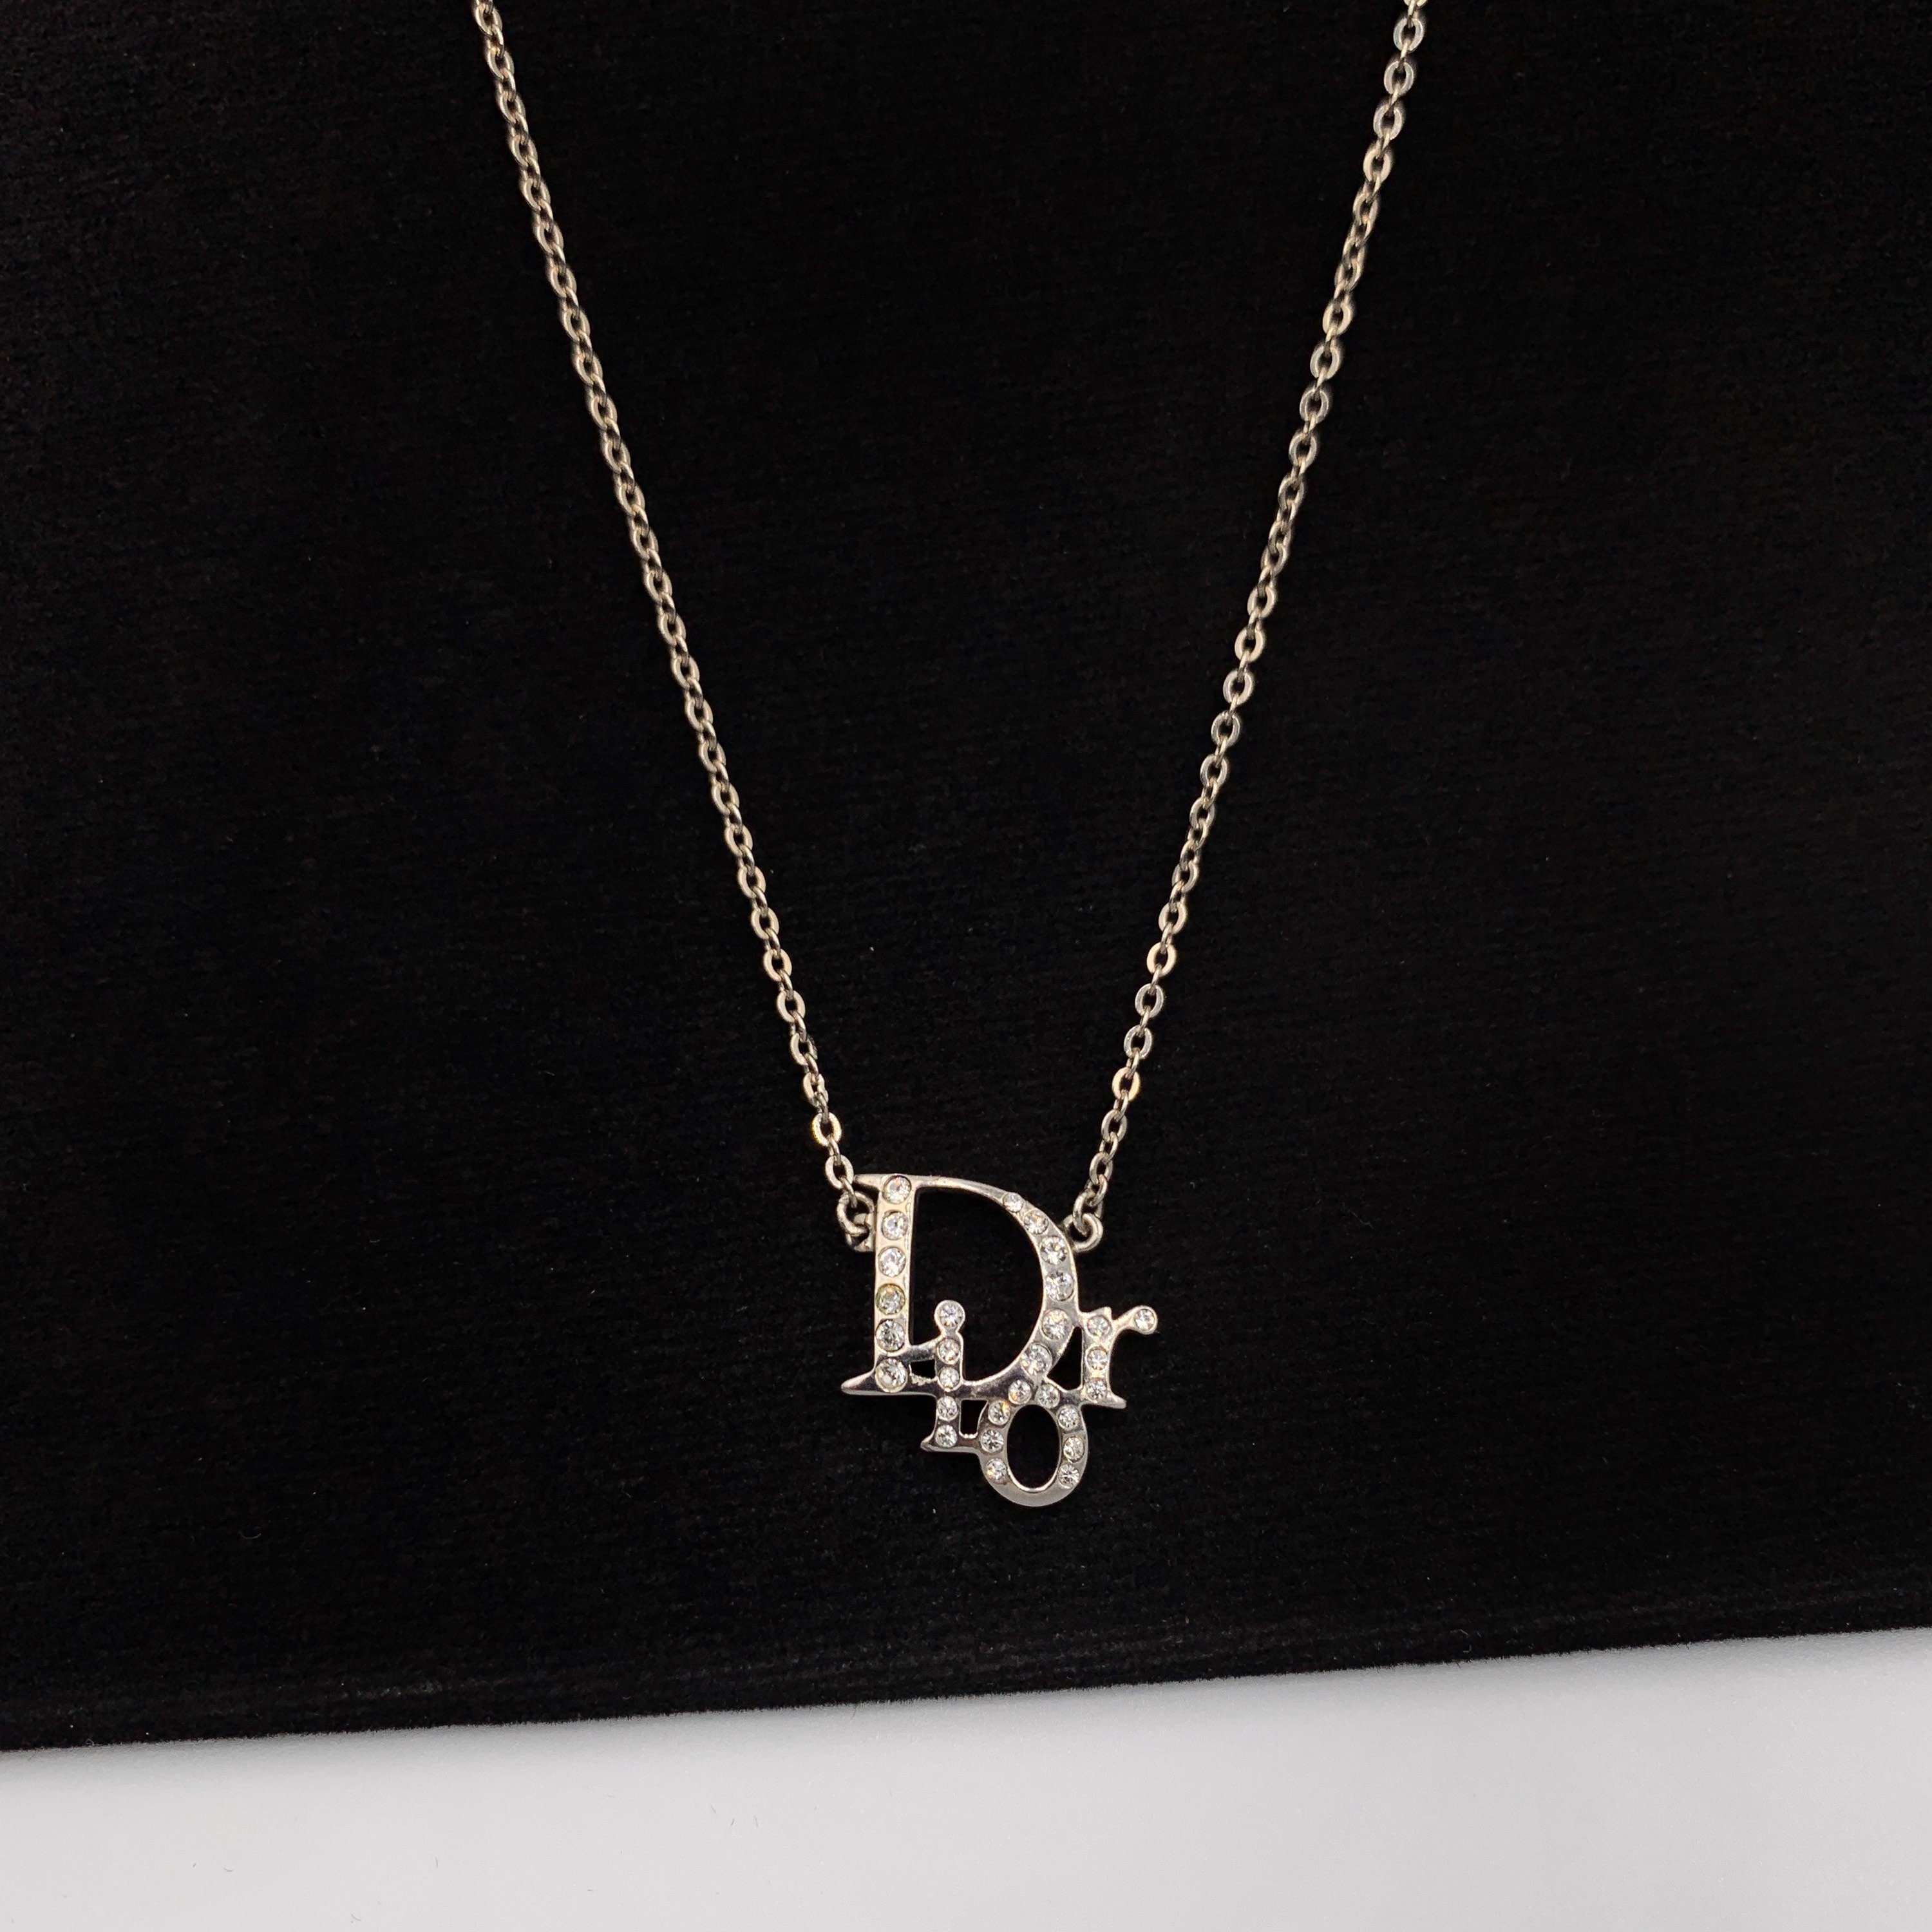 Help me find a dupe or something similar to this Dior choker : r/HelpMeFind